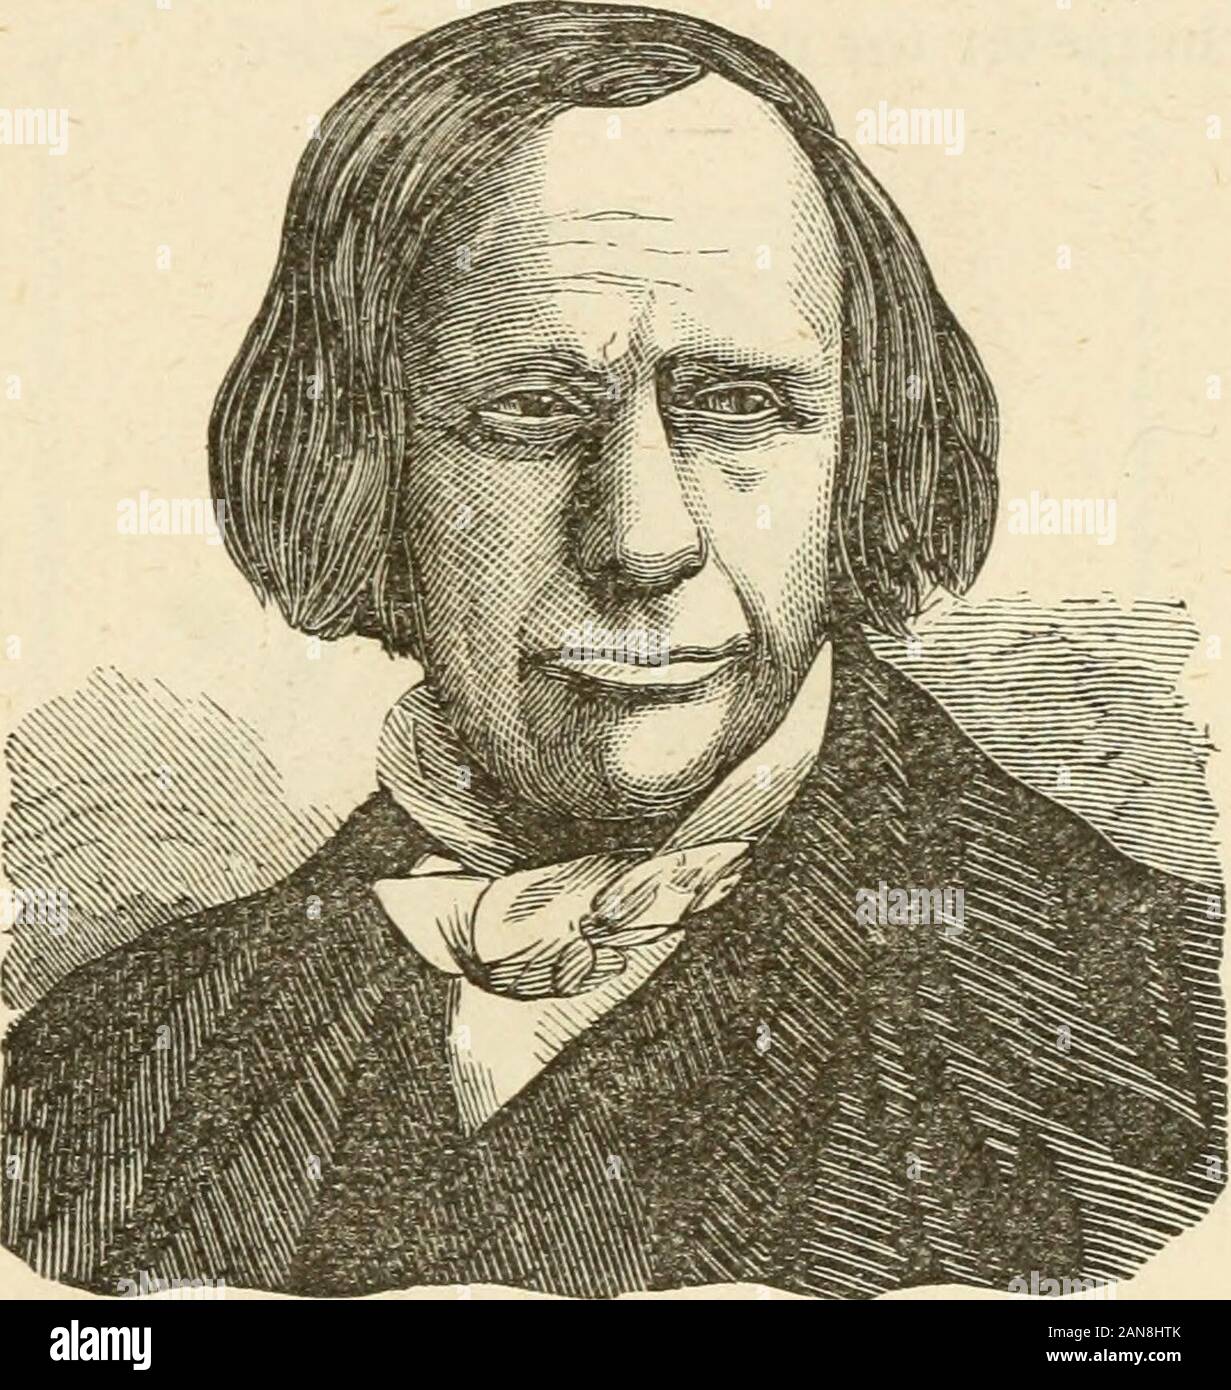 Brain and mind; or, Mental science considered in accordance withthe principles of phrenology, and in relation to modern physiology . Fig. 28.—Form Large. wide apart, and the eyeballs appear to be pressed down-ward and sidewise. Dr. J. P. Browne, of Edinburgh, says: There may be agreat distance between the eyes, with no great develop-ment of the Form, because the ethmoid bone is sometimesbut rarely very broad, and the eyes consequently much sep-arated ; but in such a case the indications of brain develop-ment in that region differ in such manner that the phrenol- OF THE INTELLECT. 89 ogist who Stock Photo